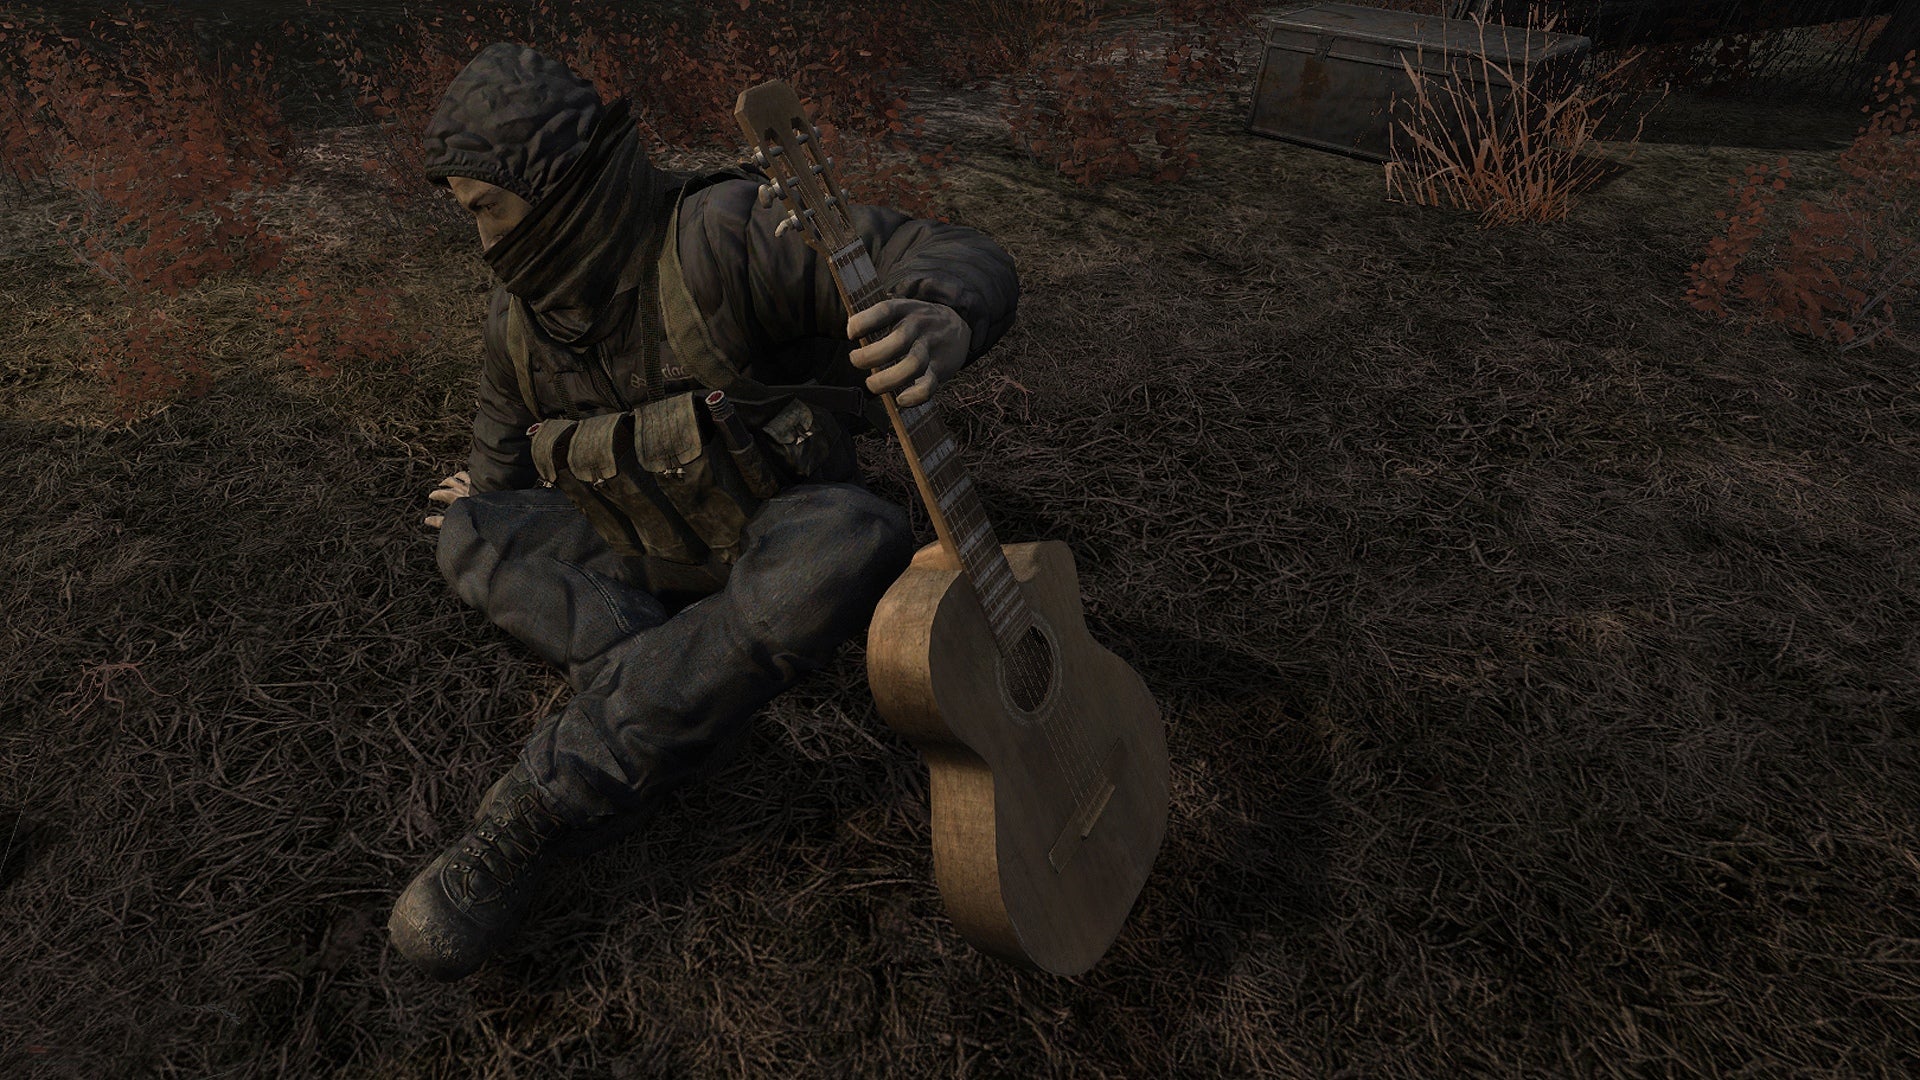 Players look down at an NPC sitting on the ground in STALKER: Shadow of Chernobyl's fan overhaul mod.